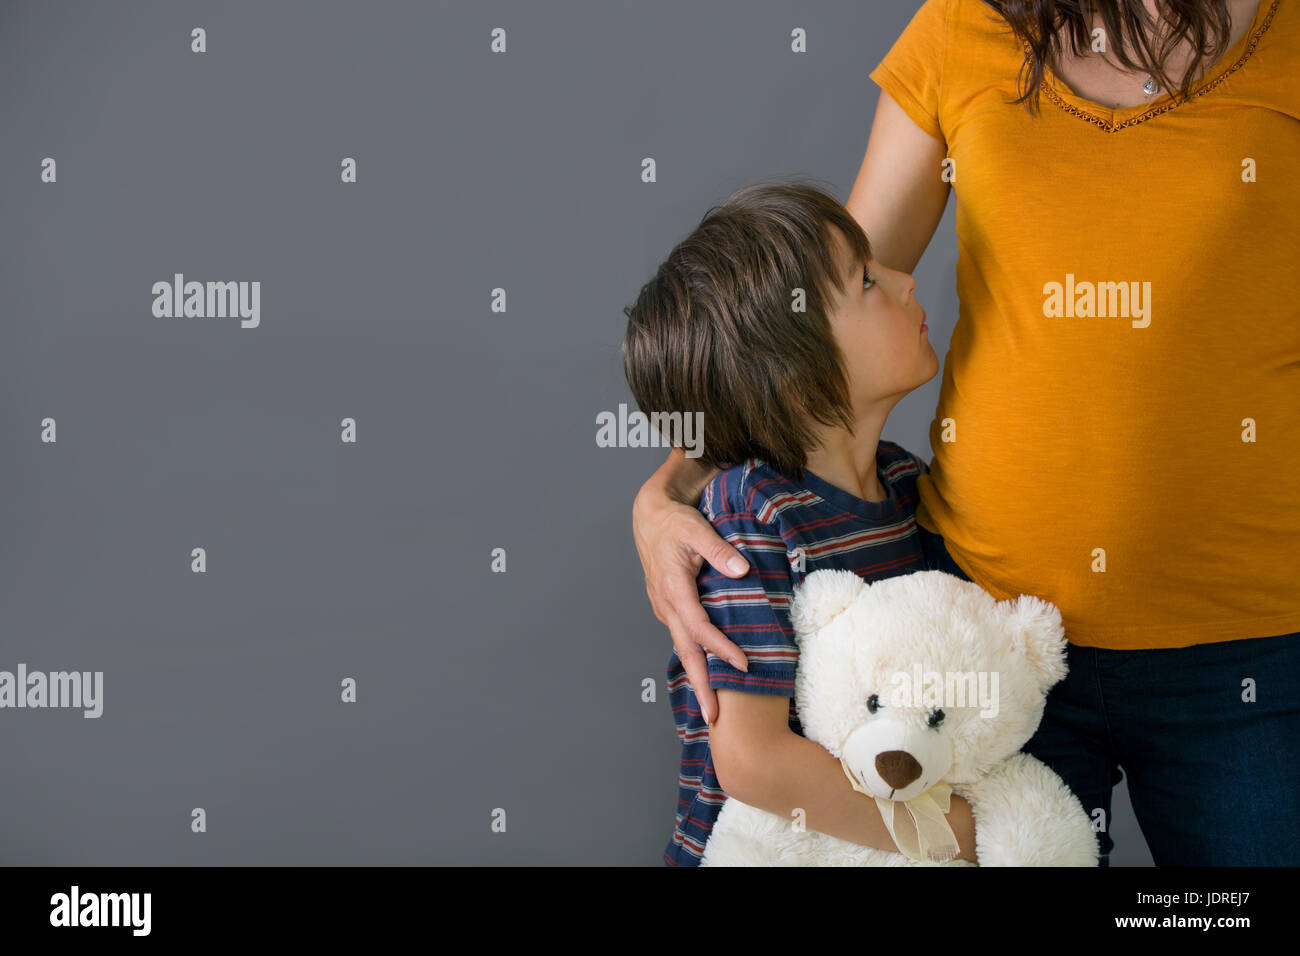 Little child, boy, hugging his pregnant mother at home, isolated image, copy space. Family concept Stock Photo